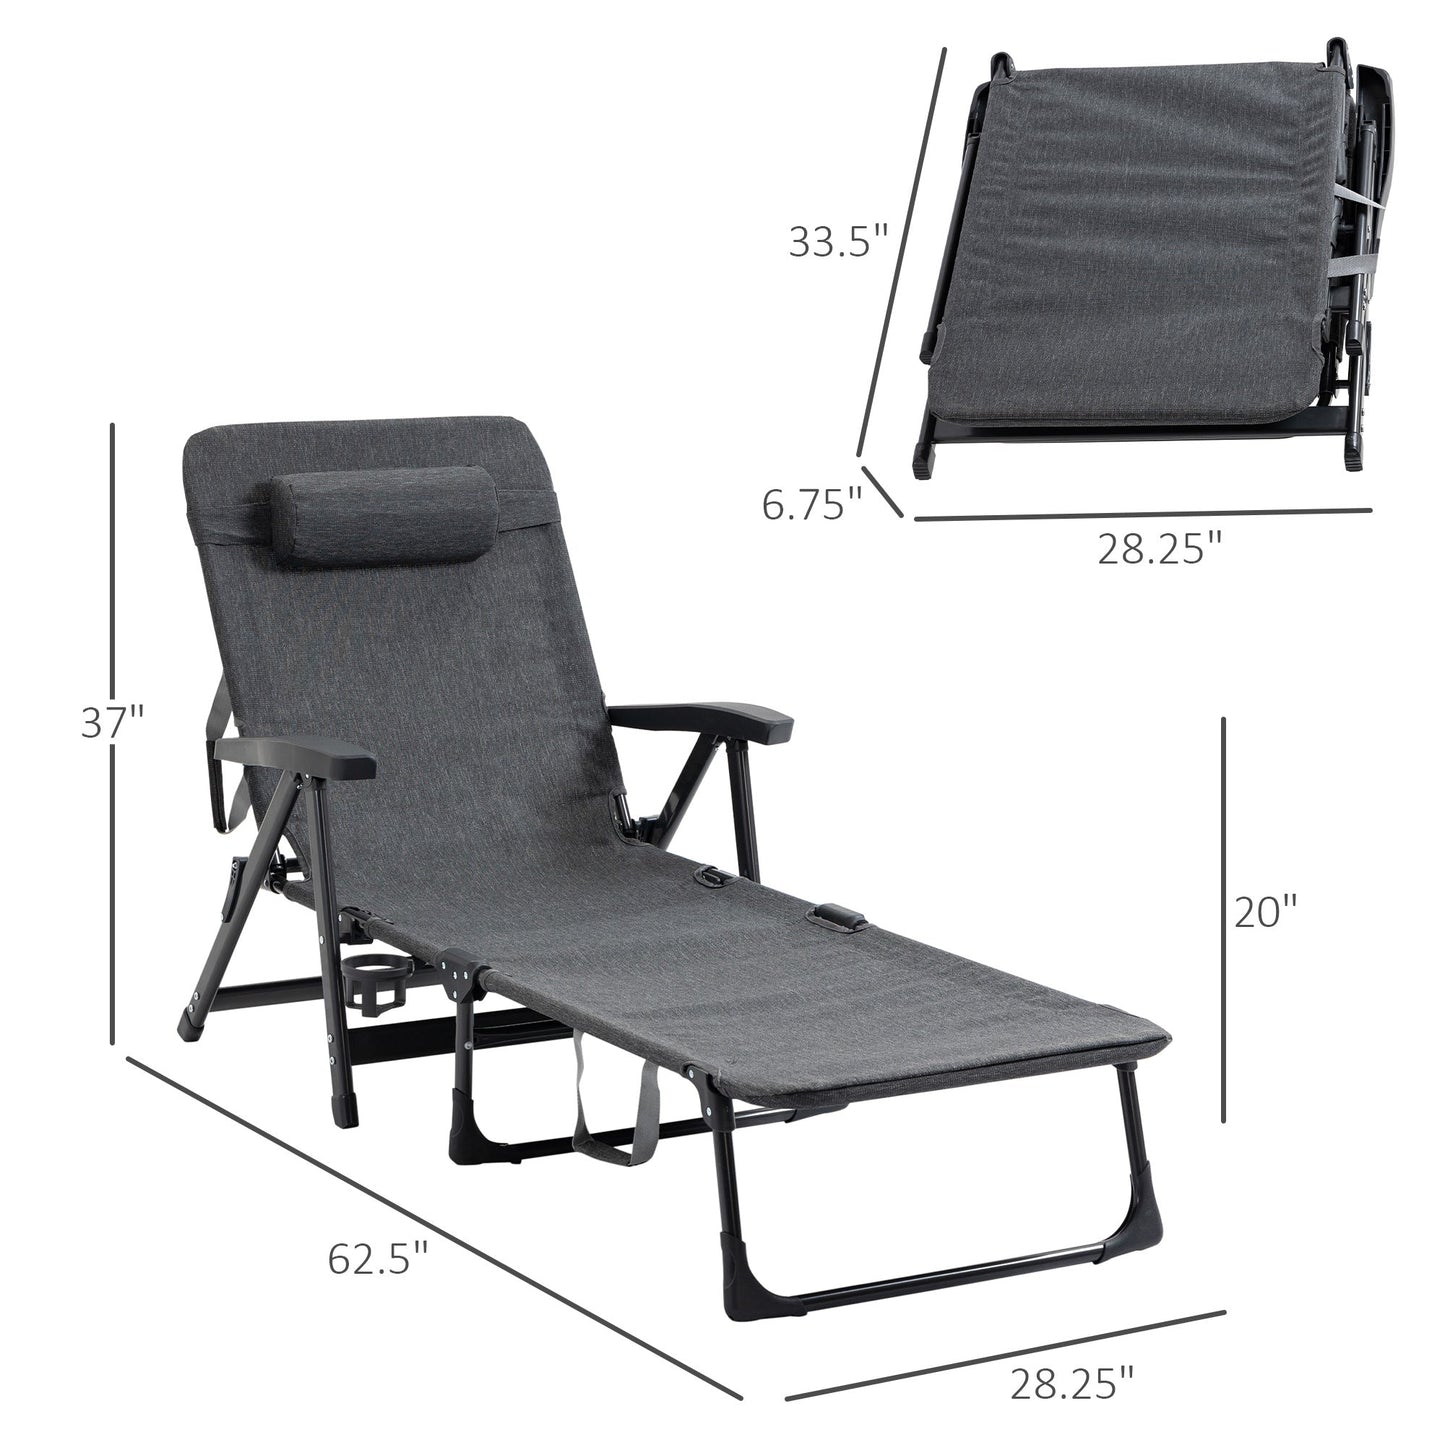 -Outsunny Folding Chaise Lounge Chair, Mesh Fabric Lounge Chair, 7-Reclining Position Sleeping Bed with Pillow & Cup Holder or Poolside, Deck, Backyard - Outdoor Style Company